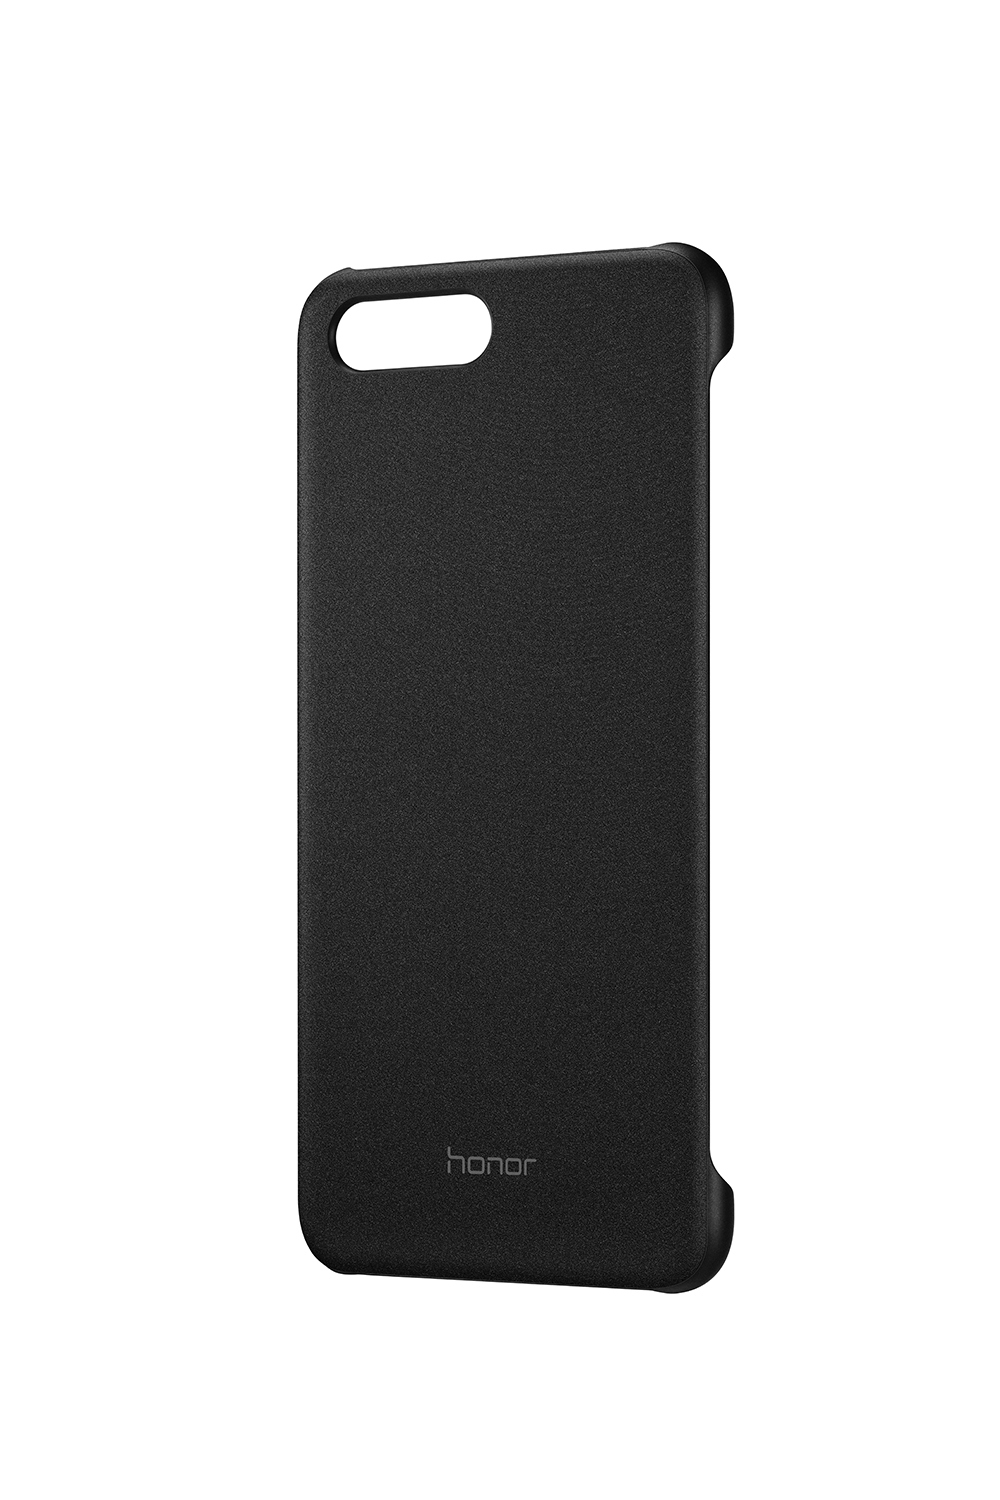 HONOR PU Honor, Schwarz View Magnet, Backcover, 10